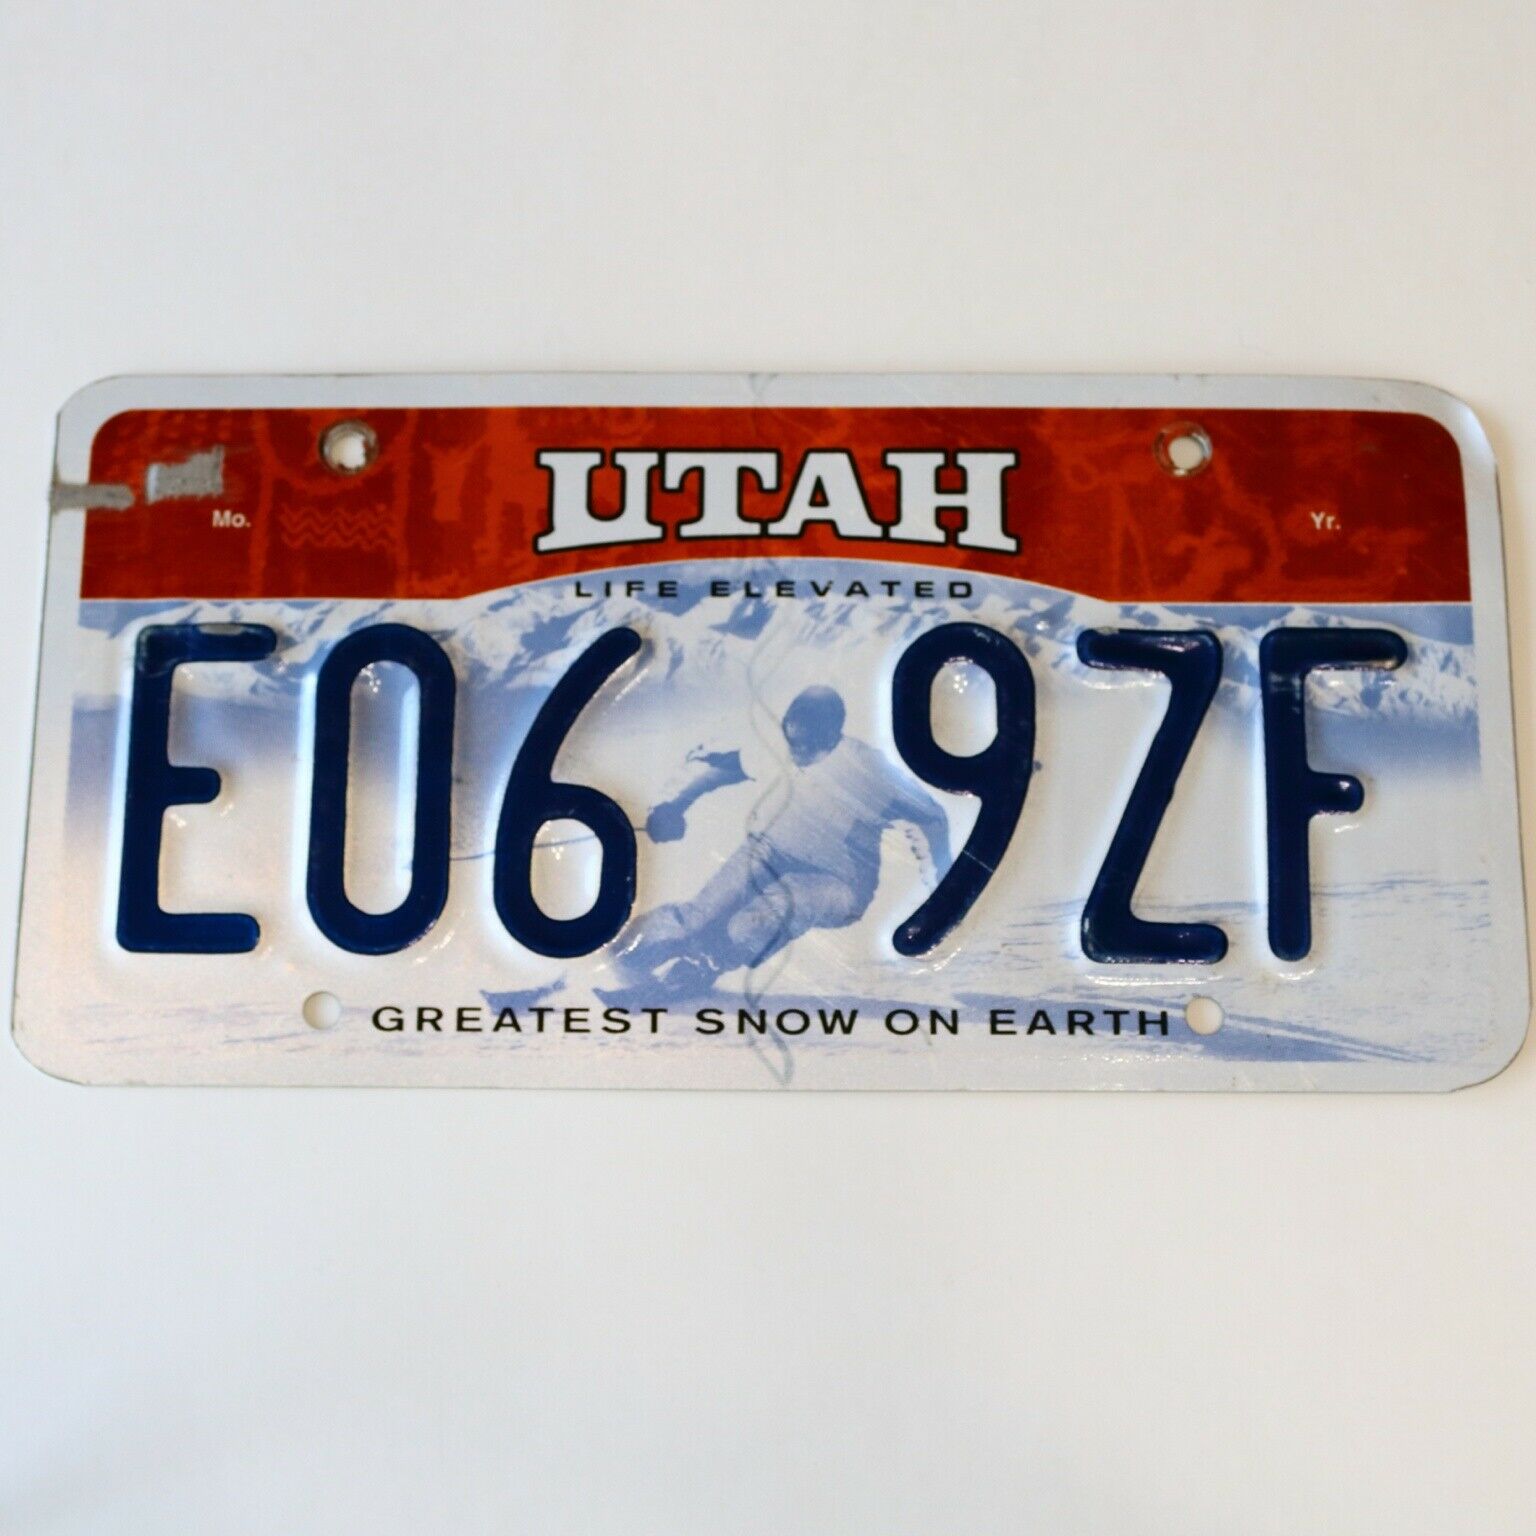 United States Utah Greatest Snow On Earth Passenger License Plate E06 9zf